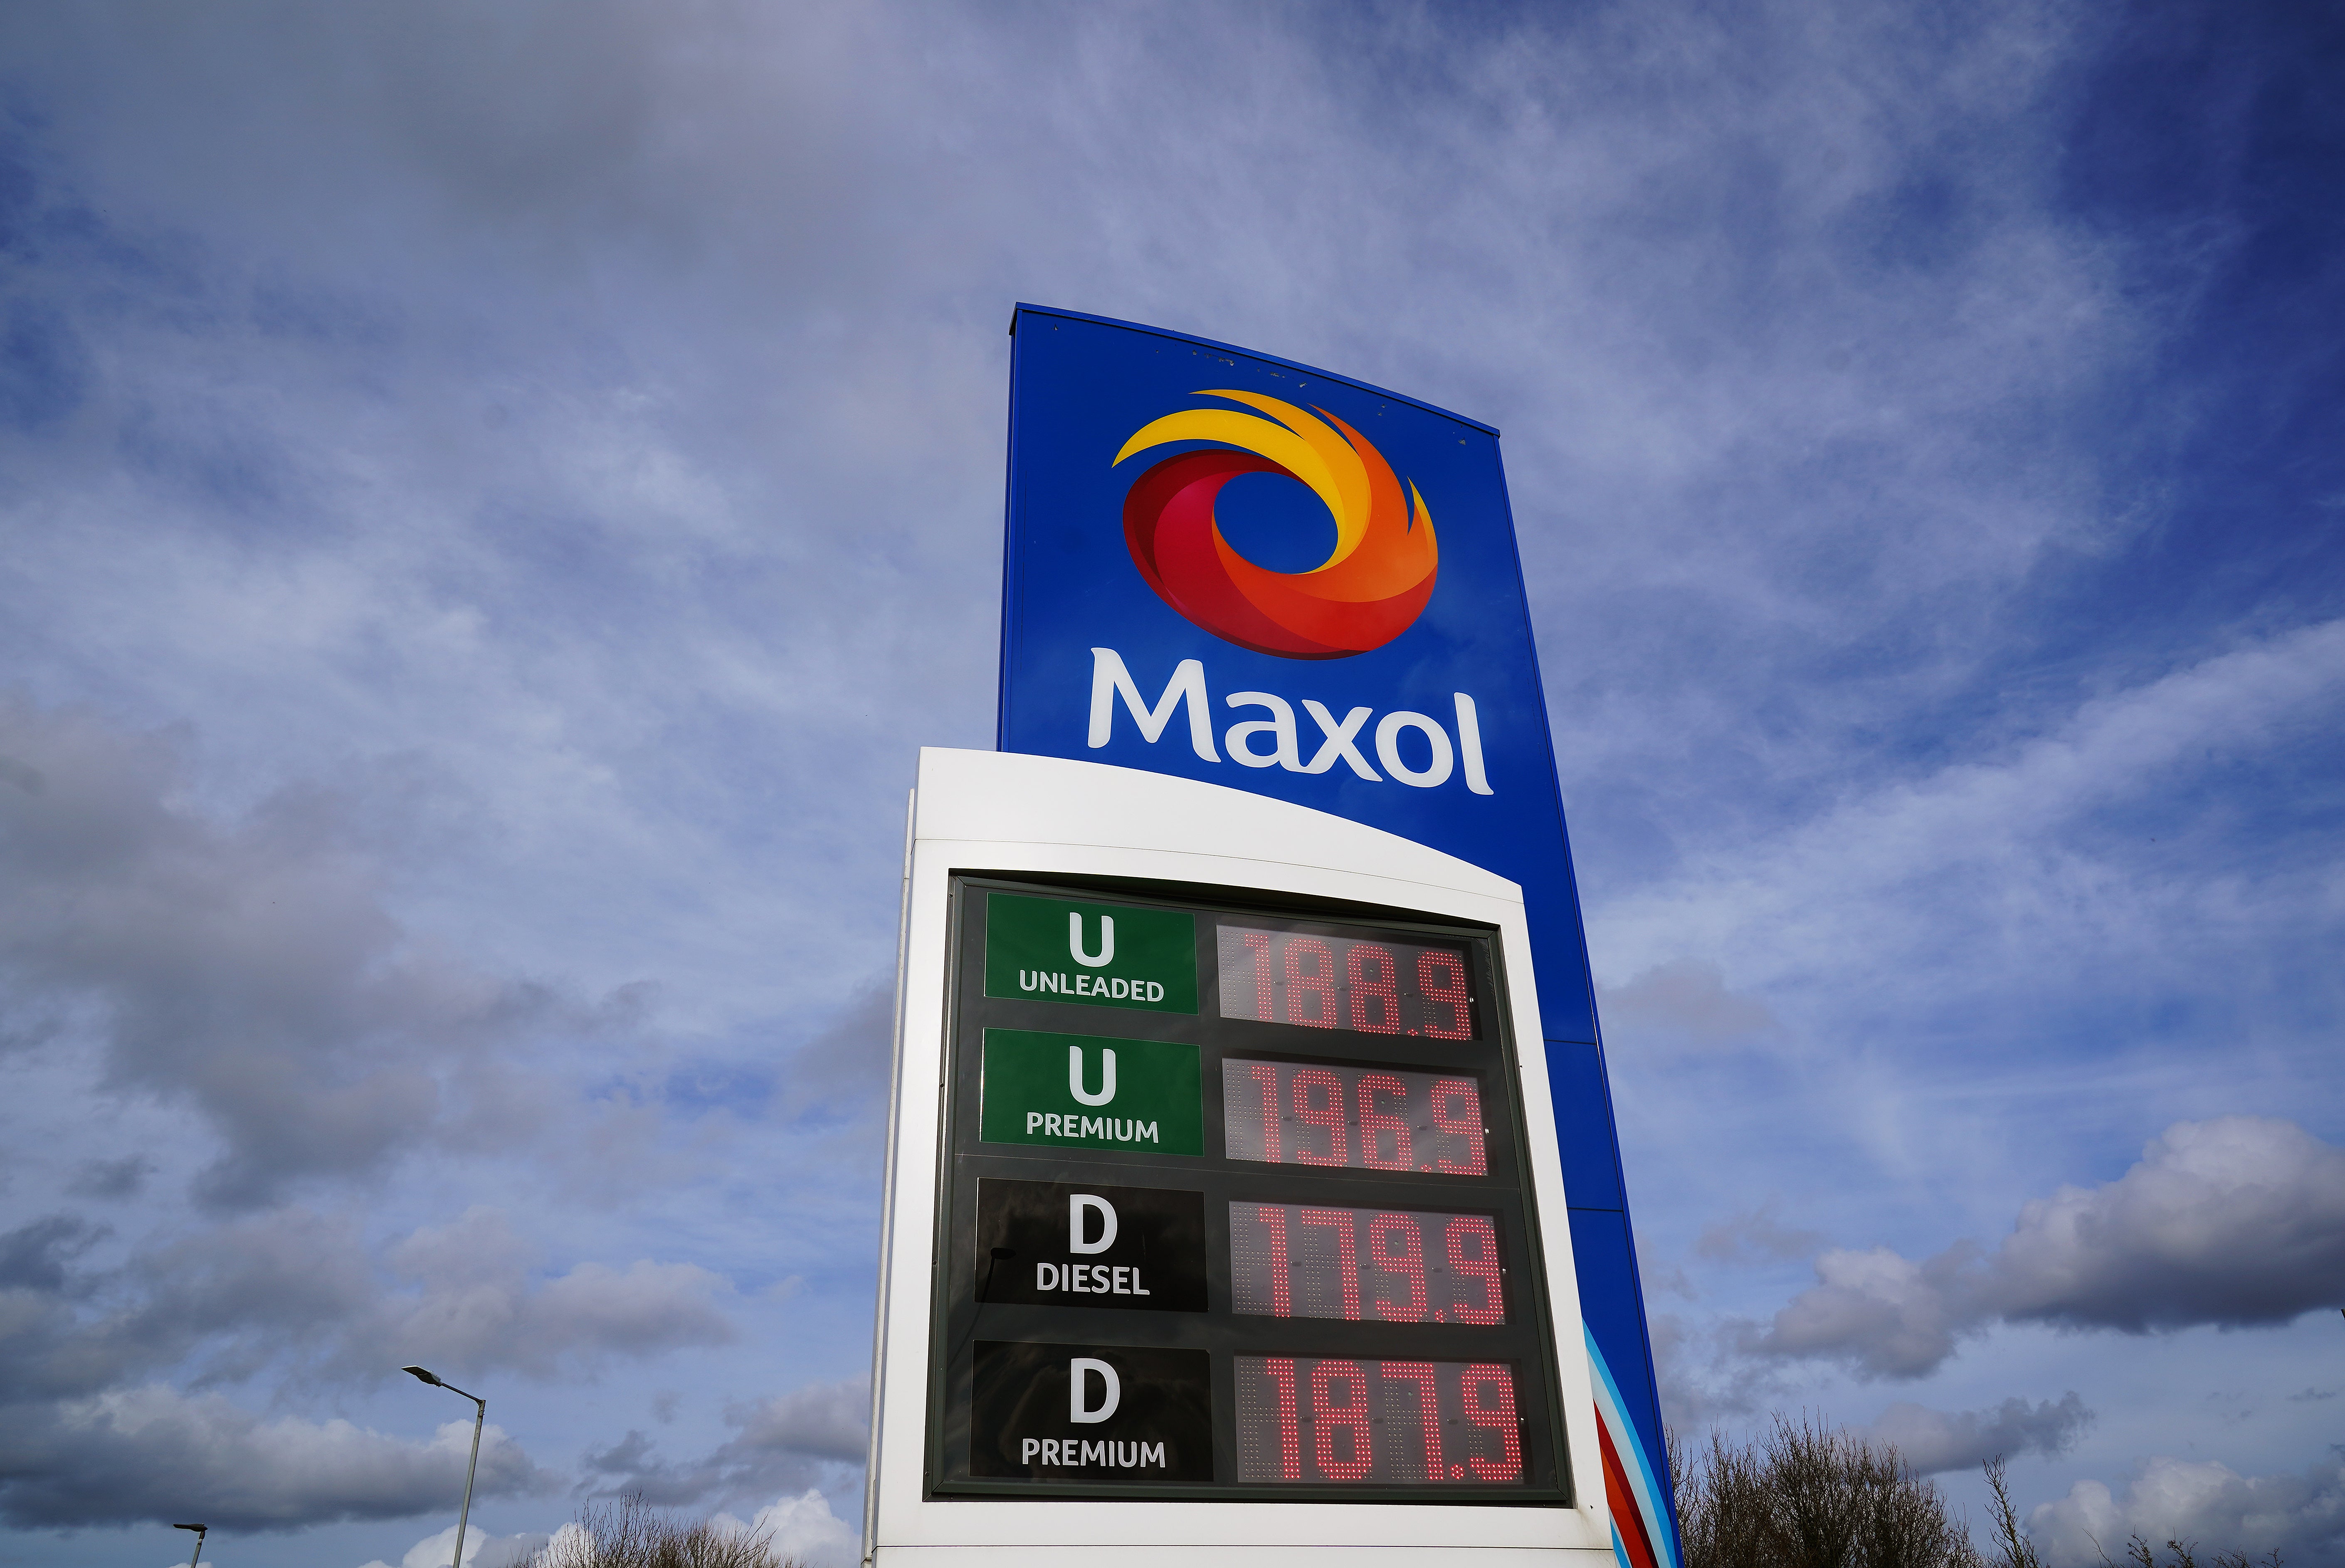 The Irish Government is expected to agree a plan to cut fuel costs by a reduction in excise duties amid spiralling price rises. (Brian Lawless/PA)